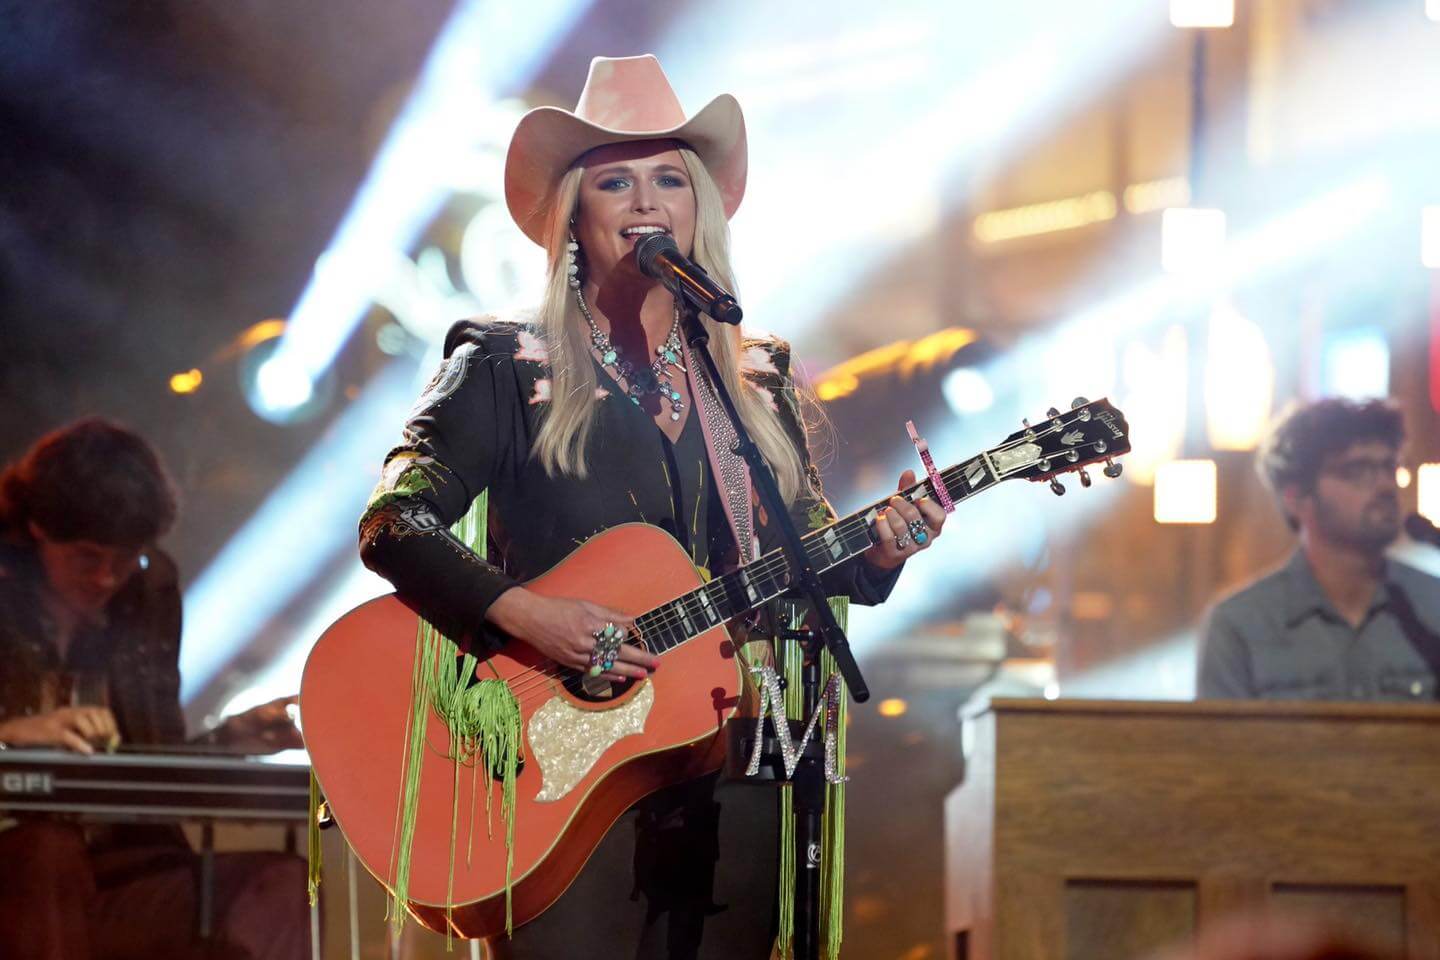 country singer performs with cowboy hat and guitar